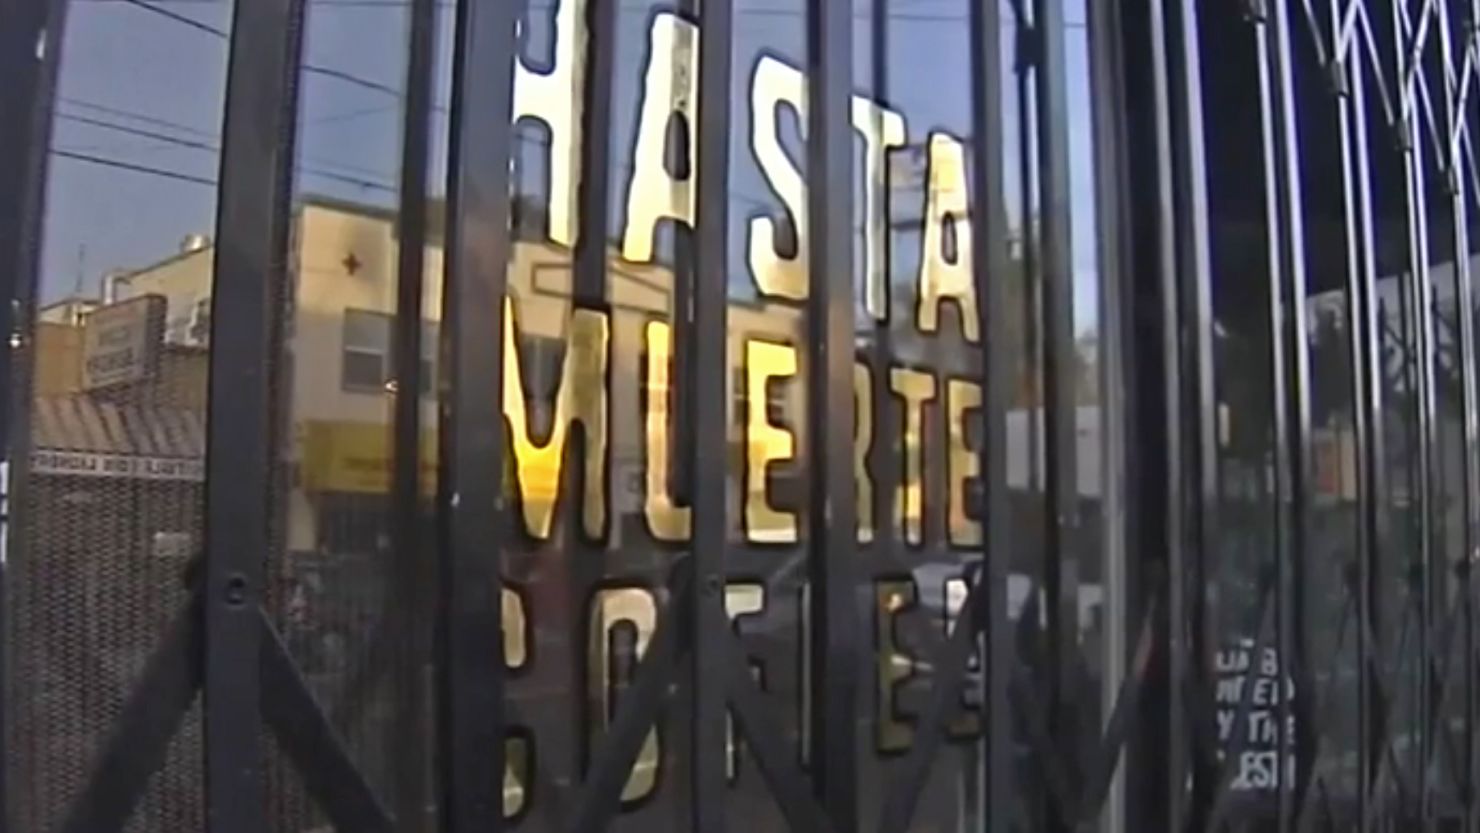 Owners of Hasta Muerte Coffee told an Oakland police officer to leave because they have a policy of asking cops to leave for the "physical and emotional safety" of  customers.